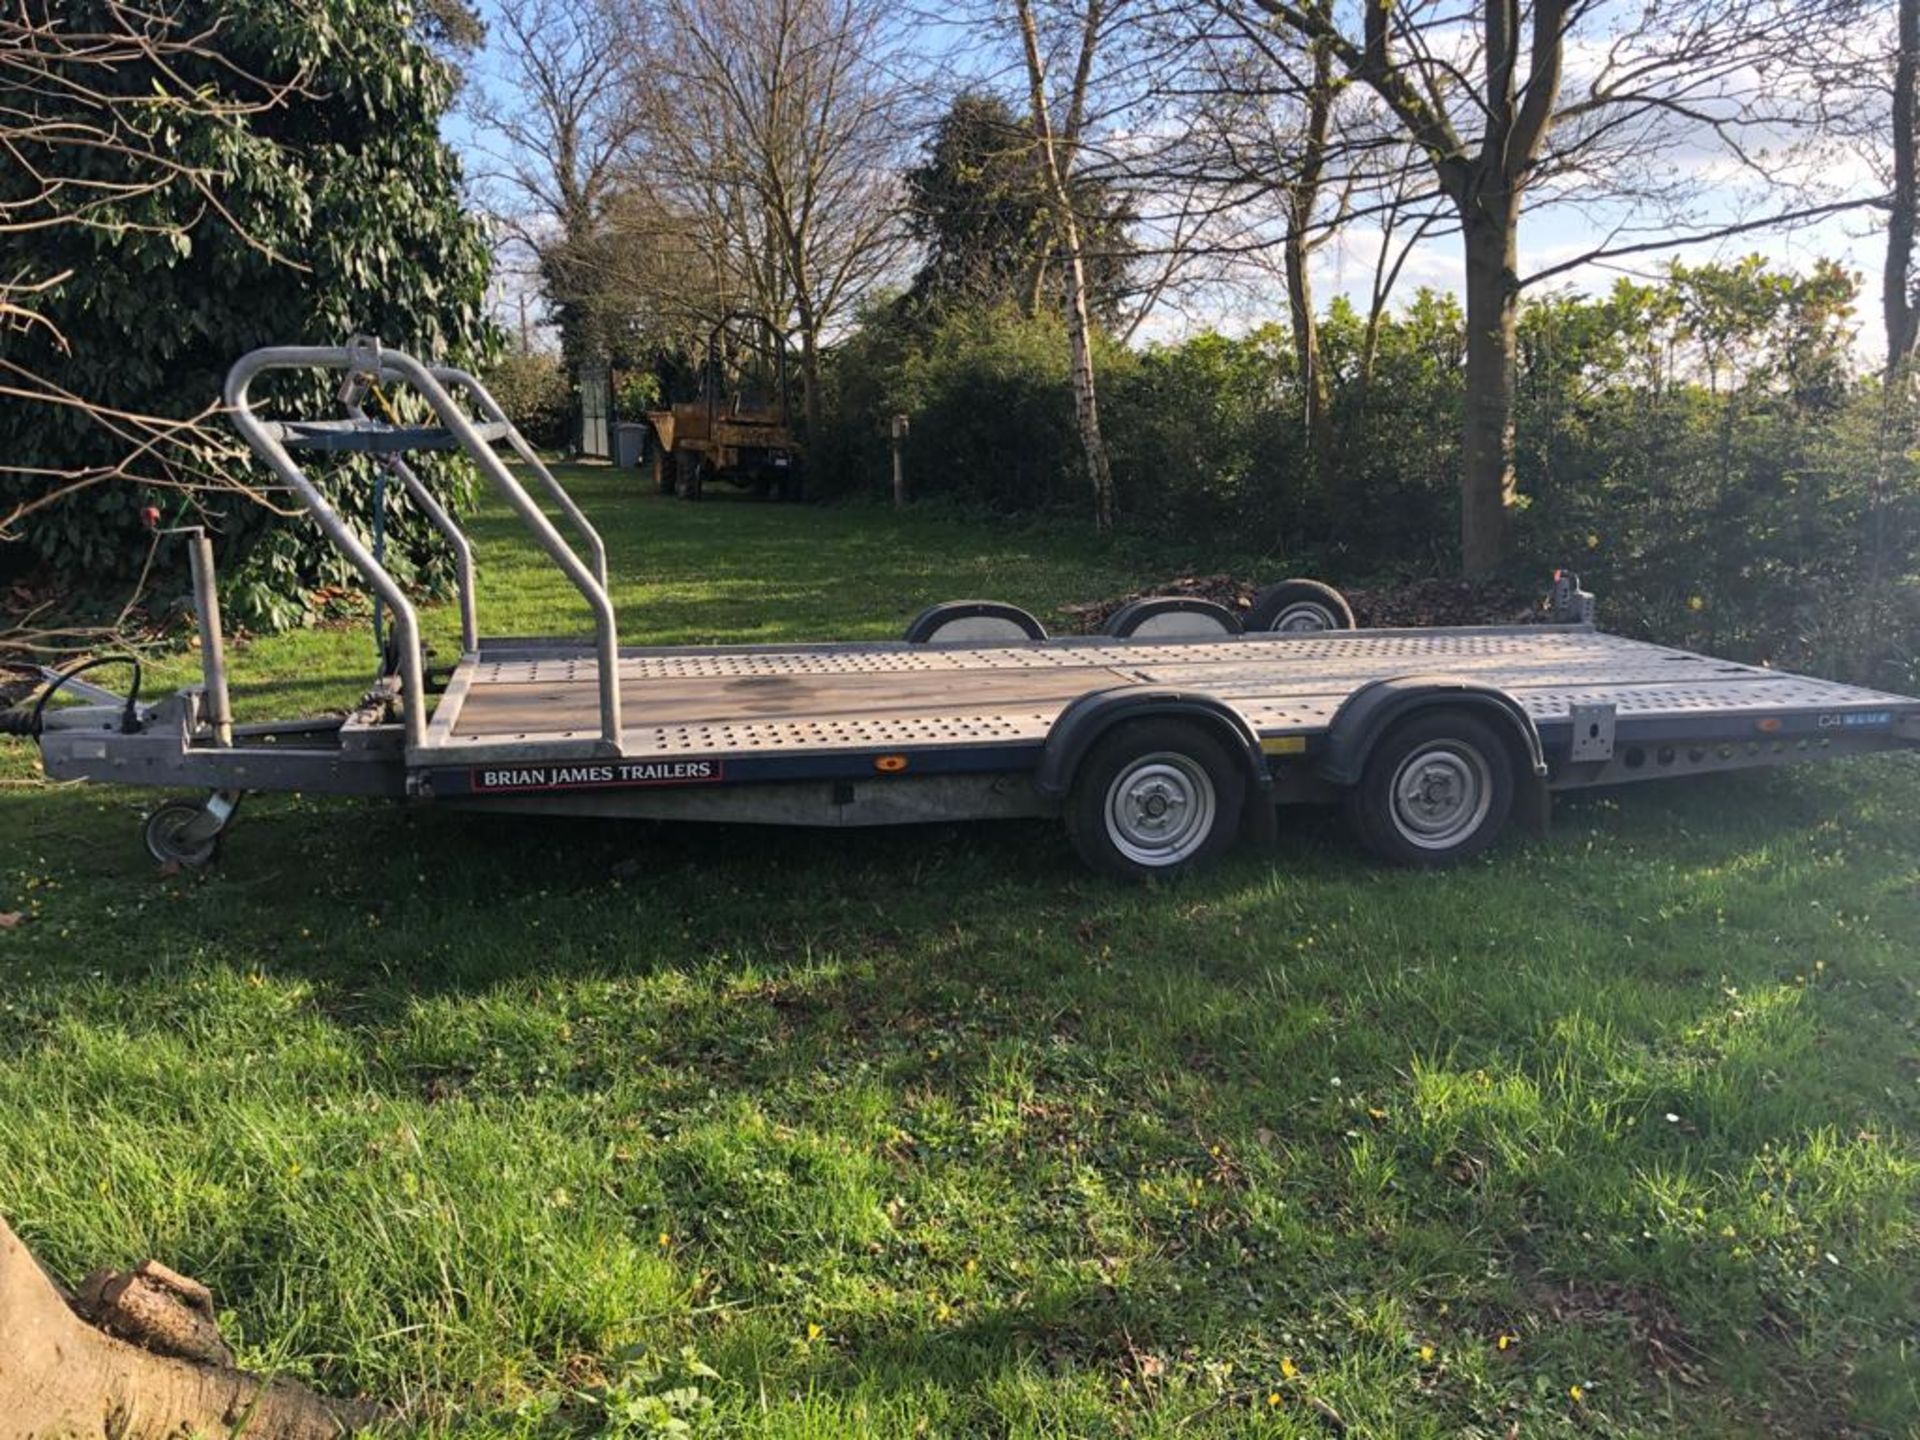 BRIAN JAMES TRAILERS TWIN AXLE C4 BLUE 2600KG VEHICLE TRAILER WITH WHEEL RACK & WINCH *PLUS VAT* - Image 2 of 12